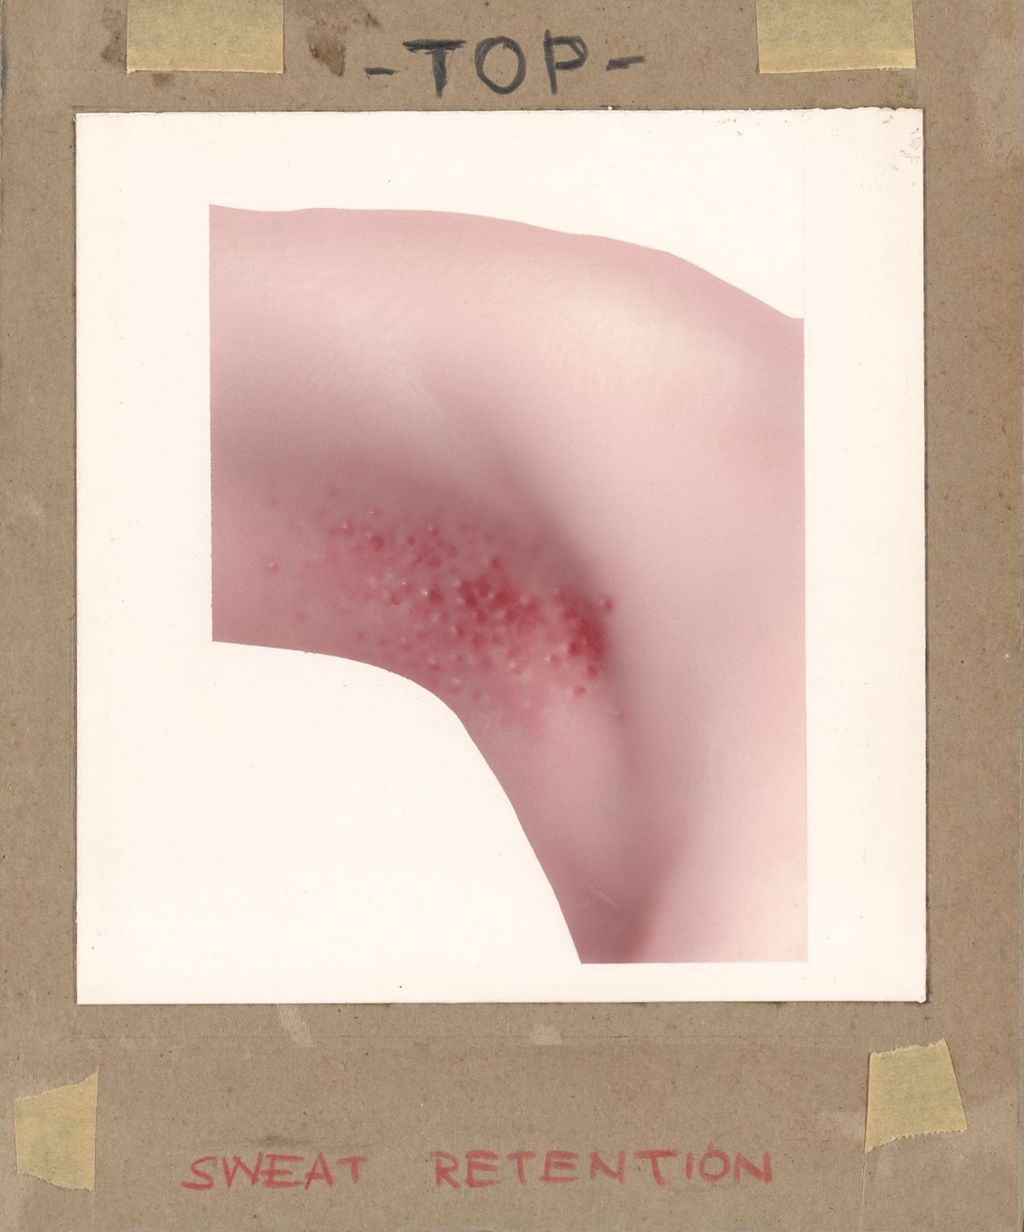 Miniature of Handbook on Common Dermatological Problems, Underarm Showing Sweat Retention Syndrome